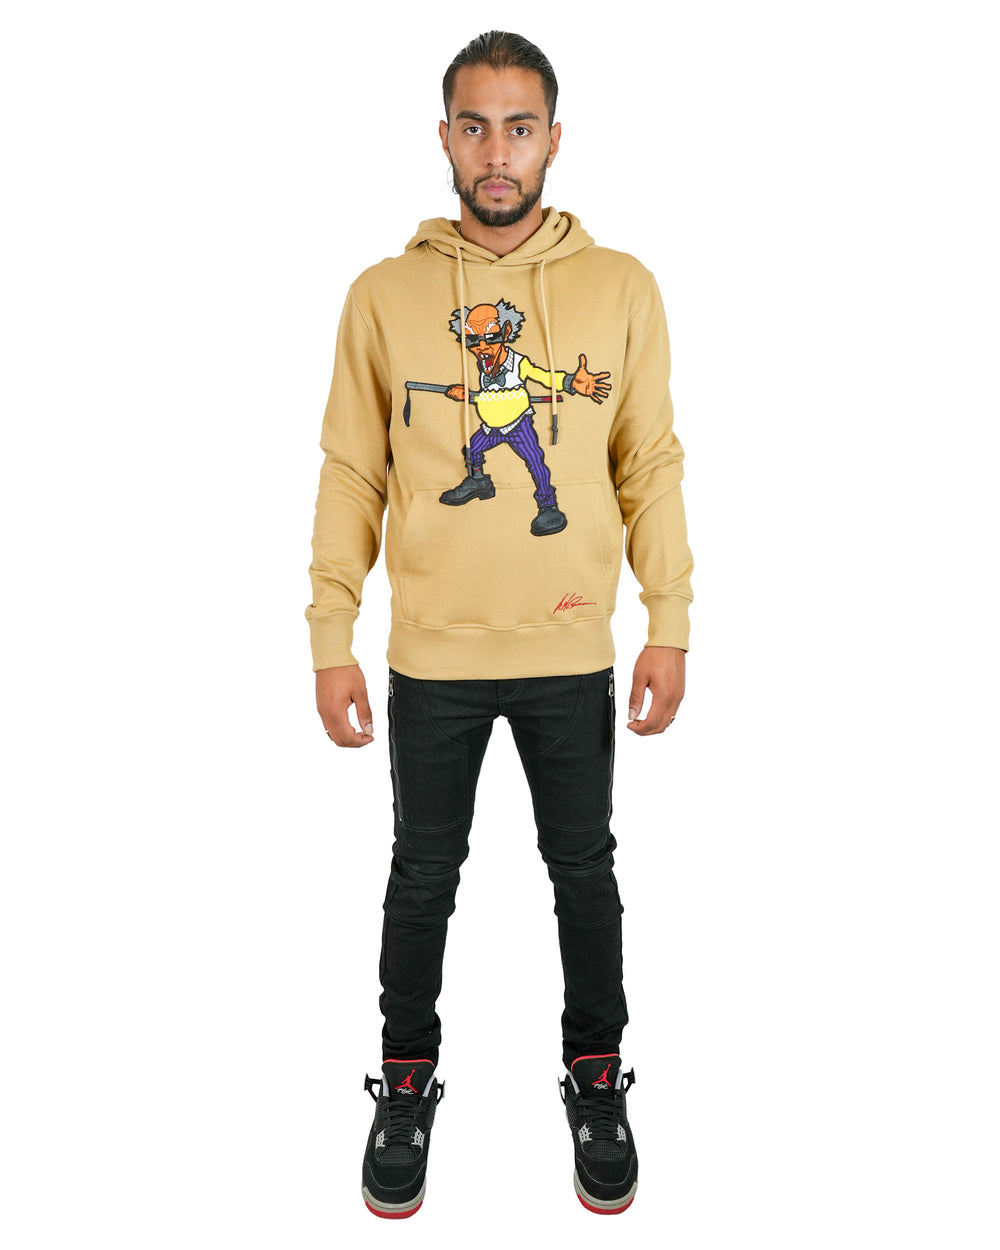 The Boondocks - Colonel Stinkmeaner Tan Knit Hoodie